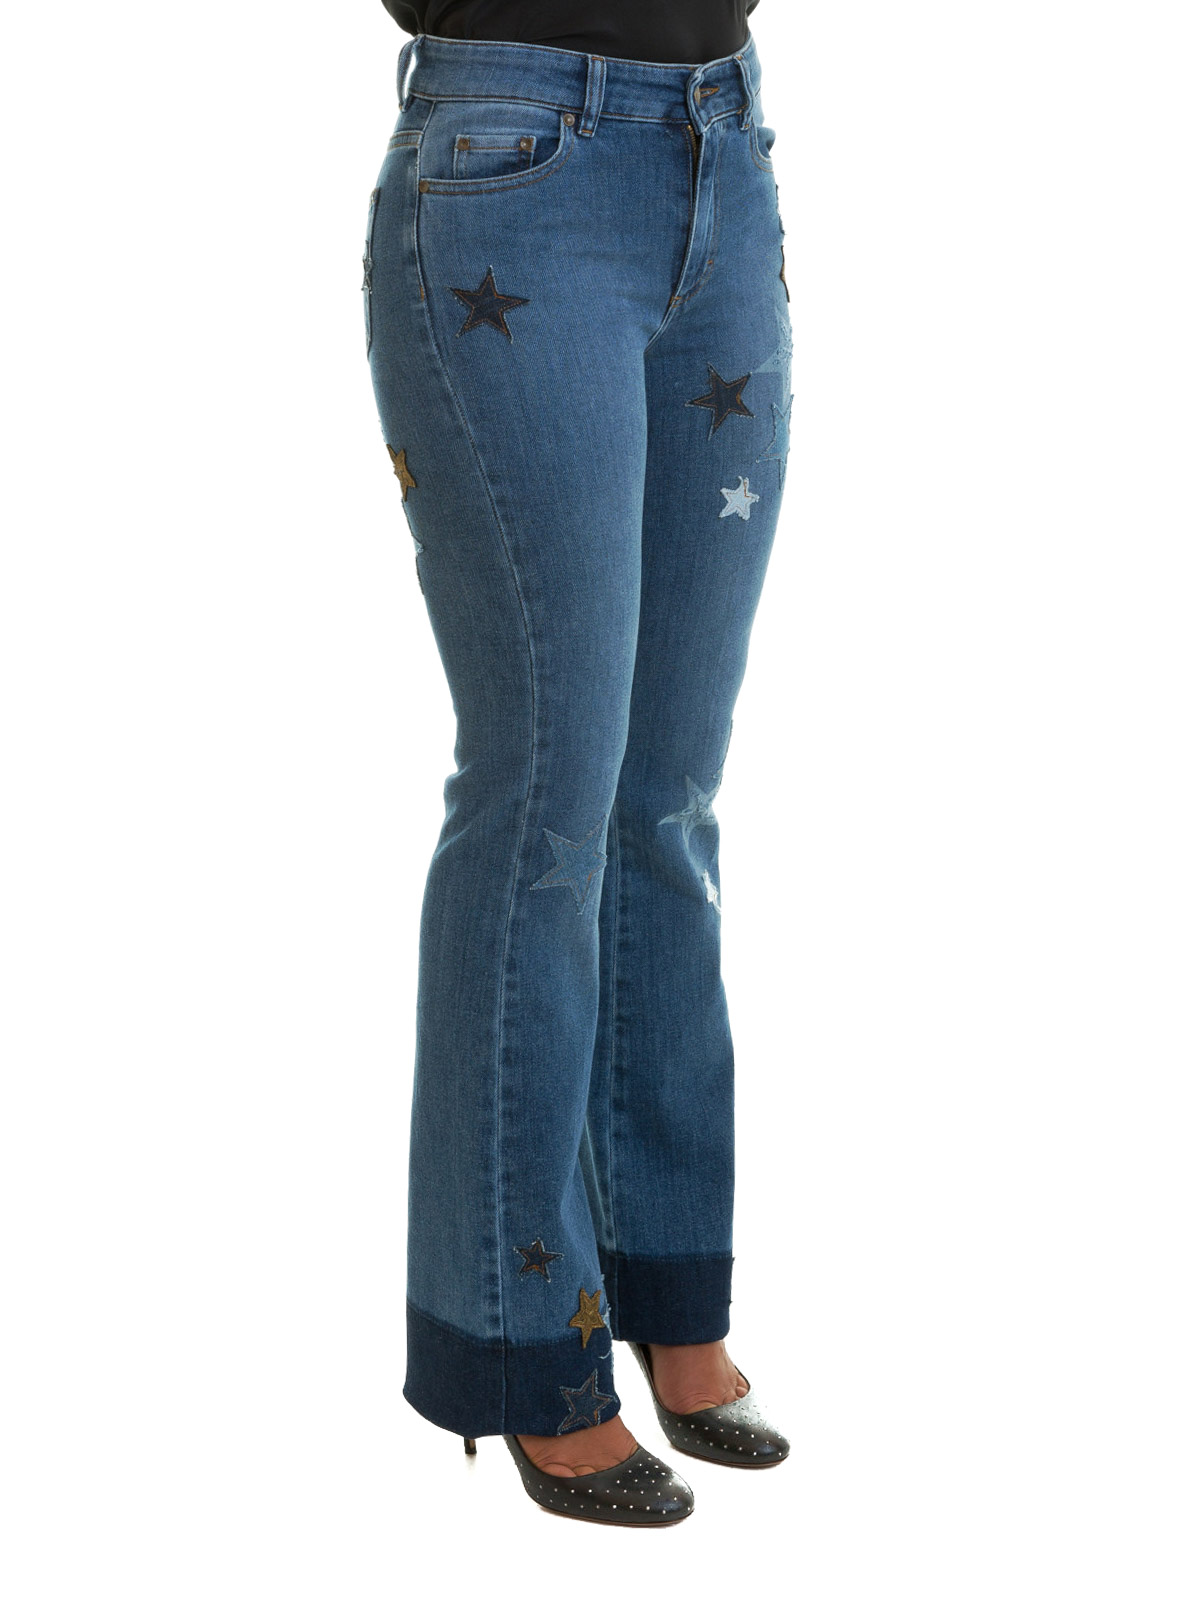 jeans with red star patches